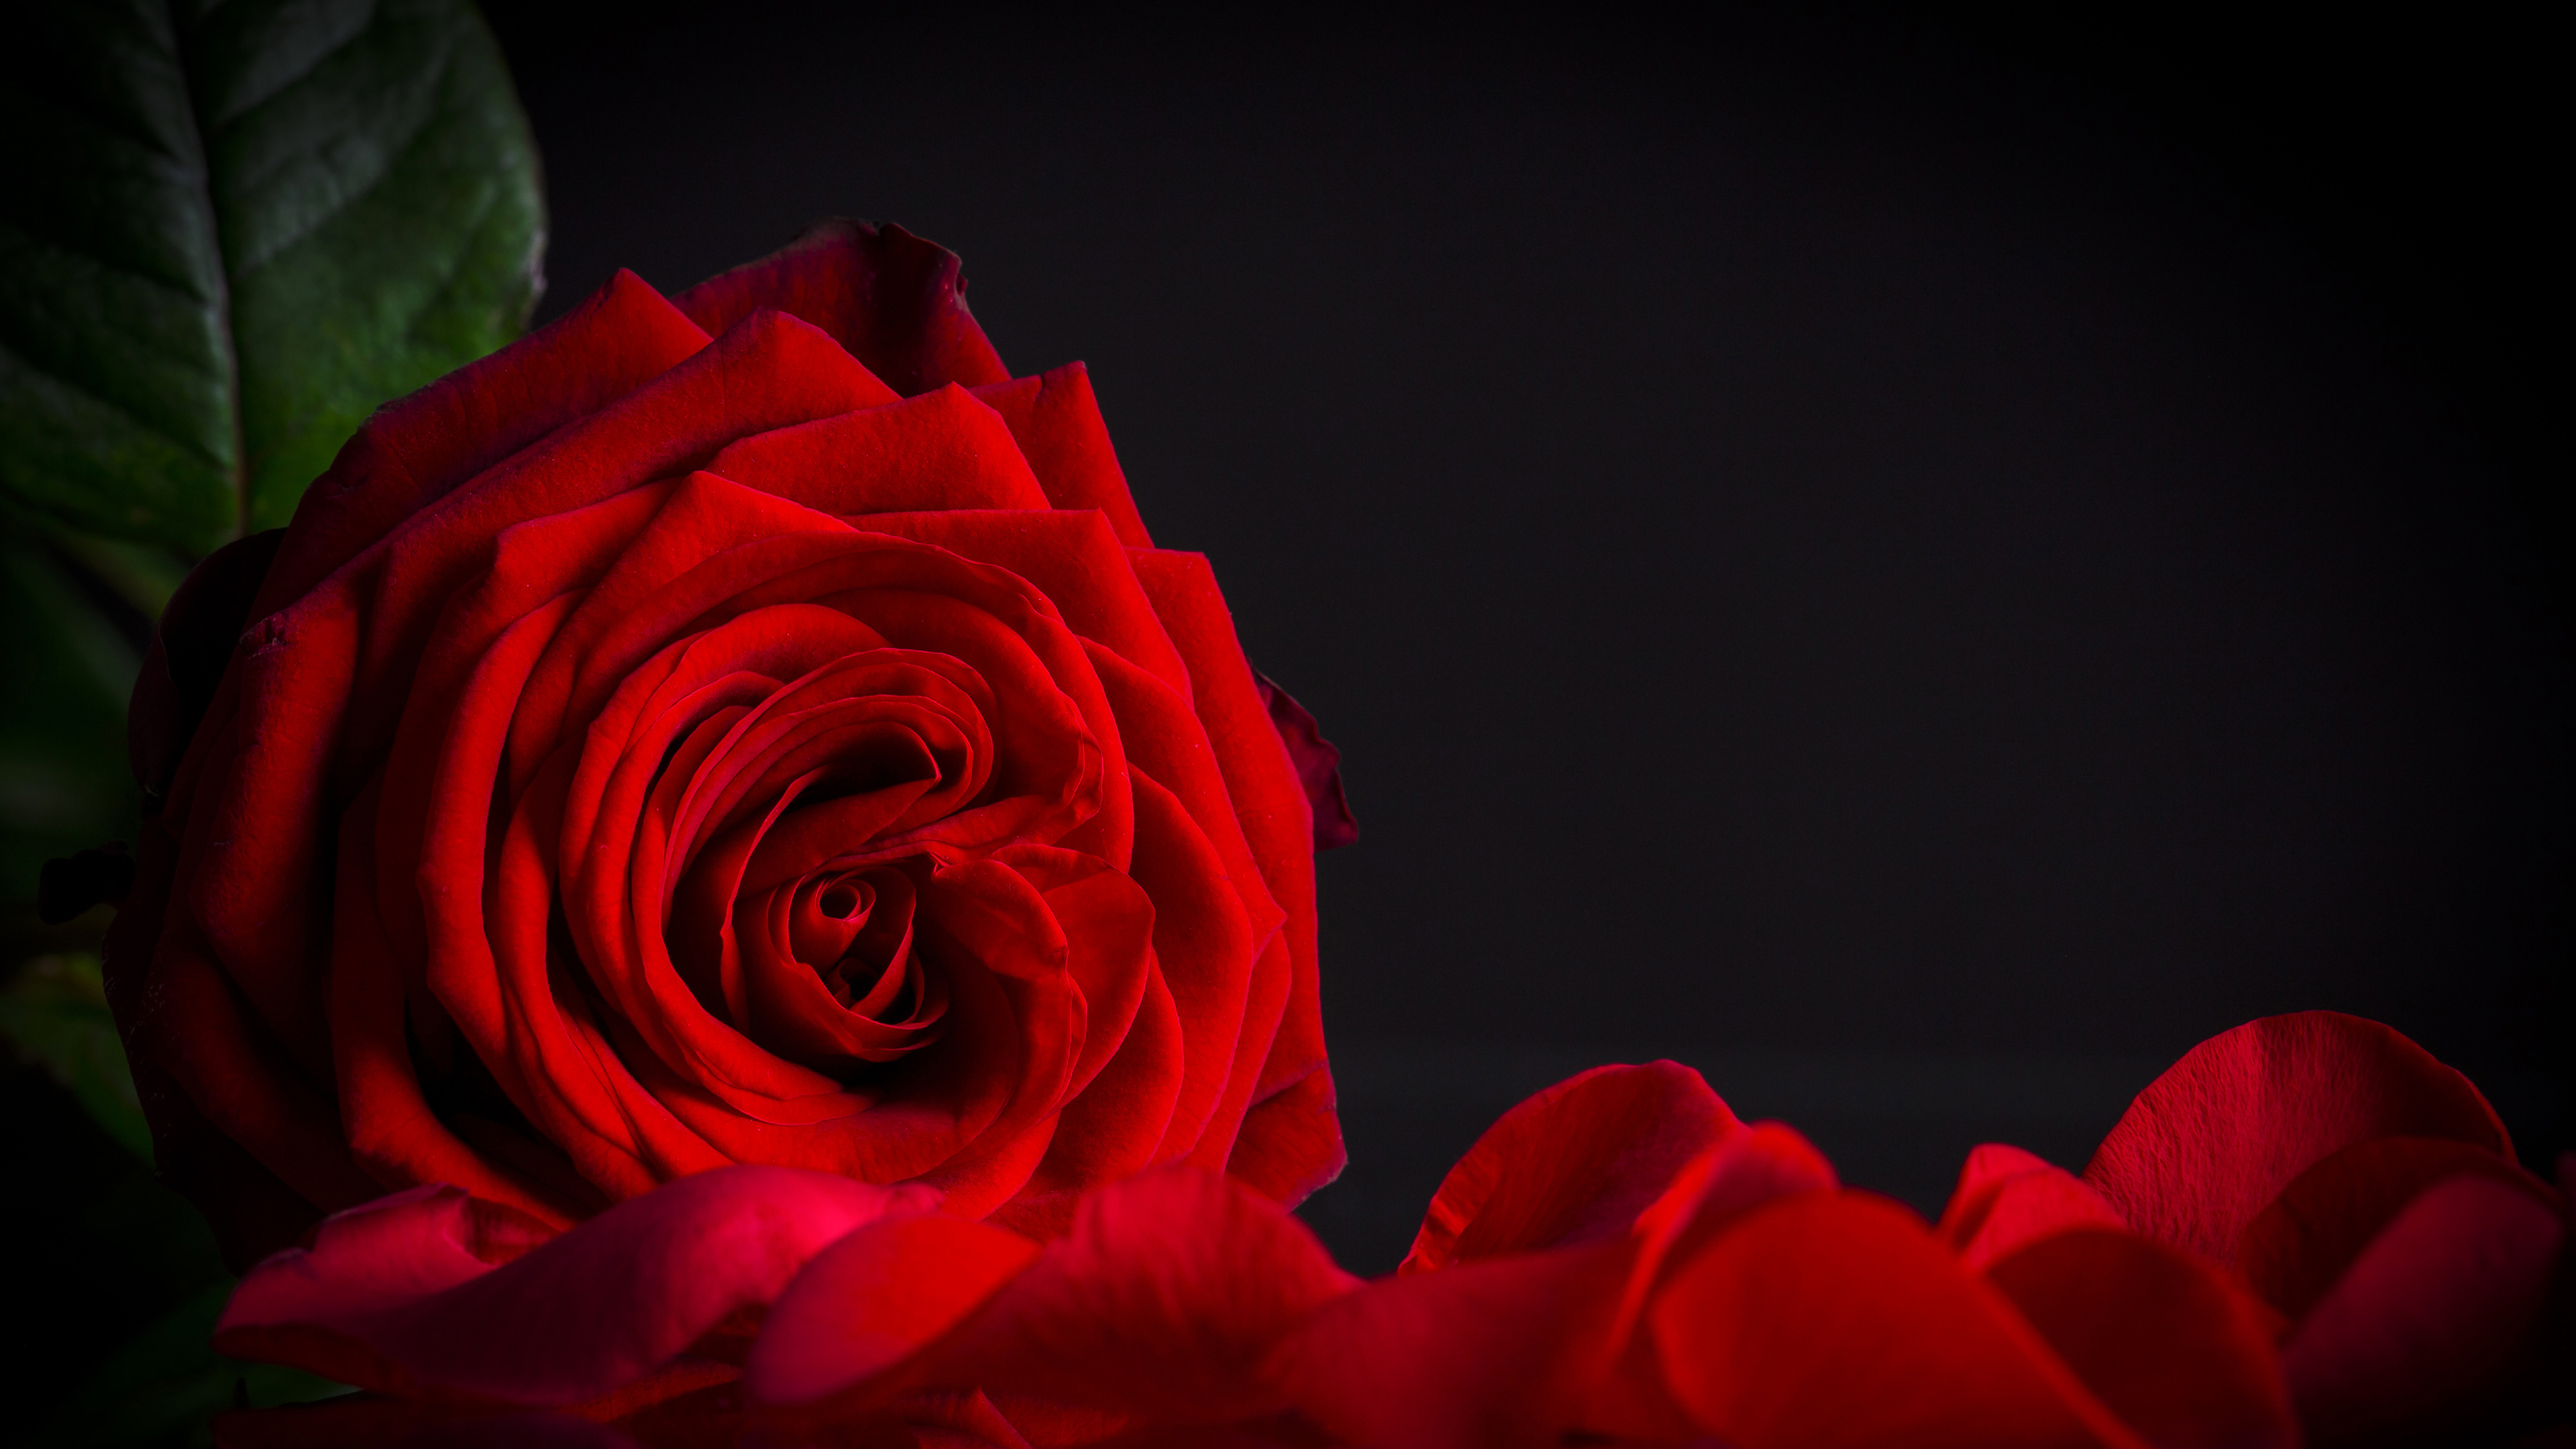 Top 25 Pictures Of Red Roses - #13 - with Black Background - HD Wallpapers | Wallpapers Download